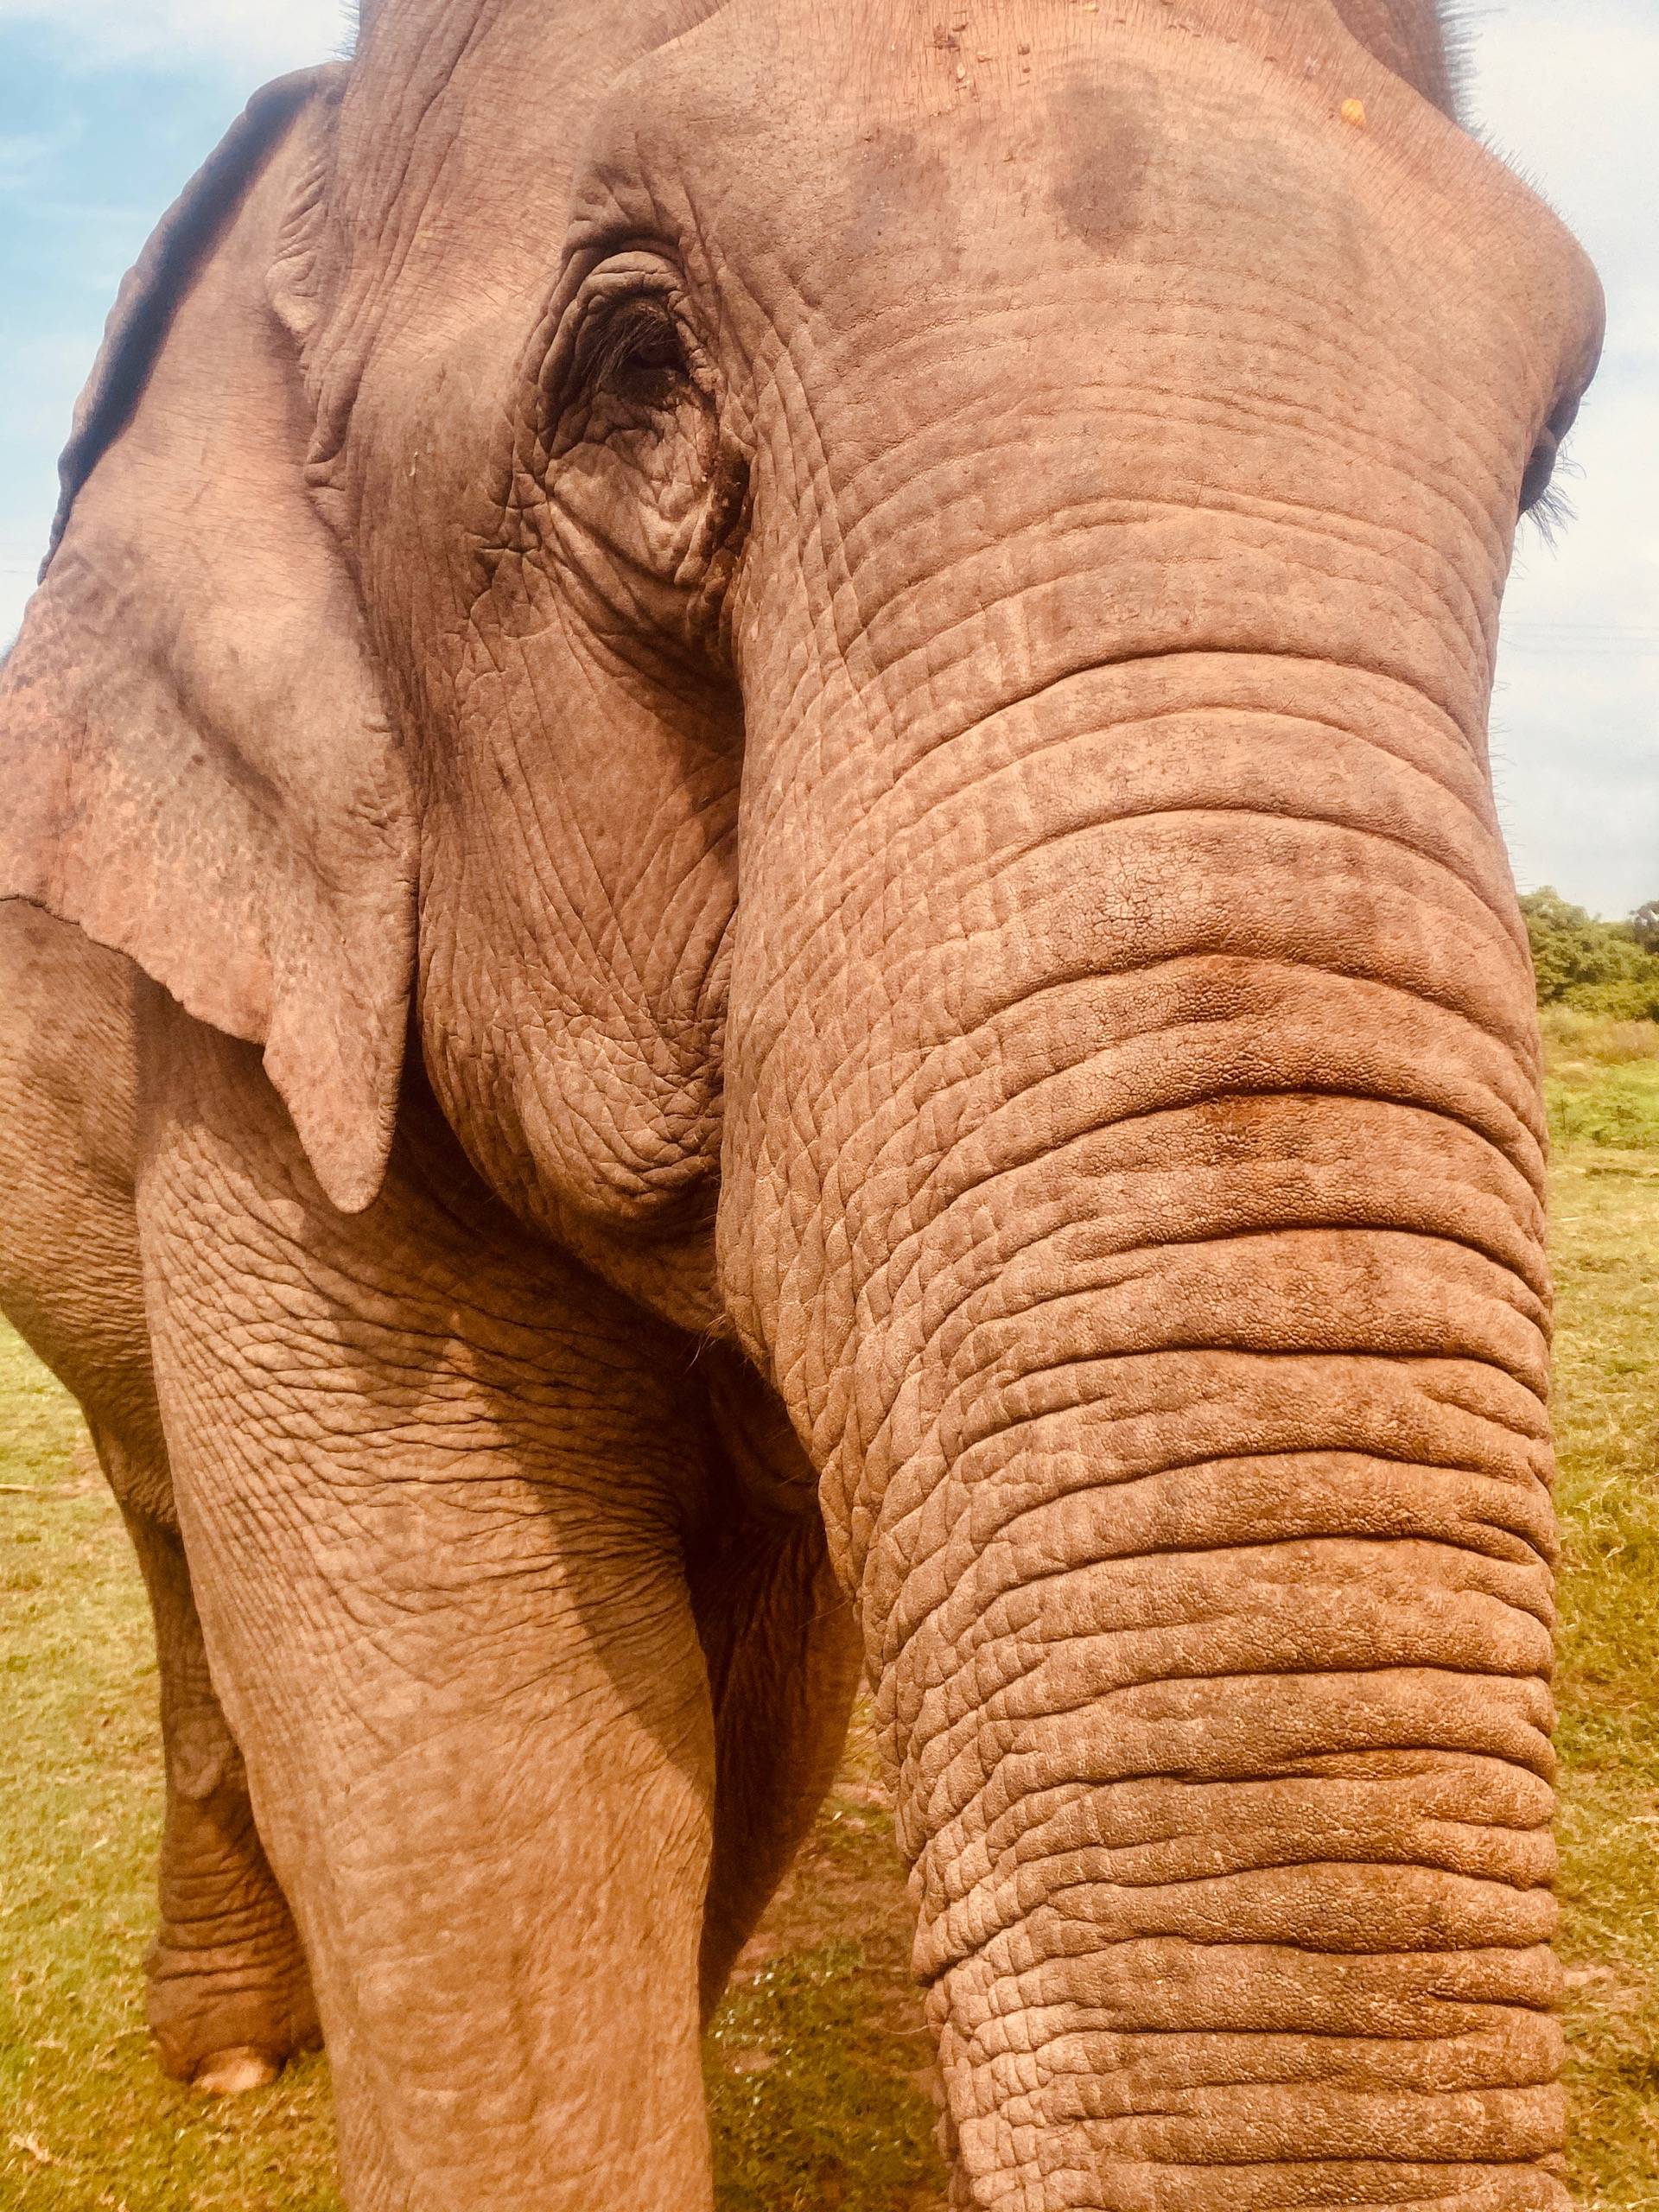 Eyes That Never Forget - ELEPHANT SANCTUARY in Vang Vieng